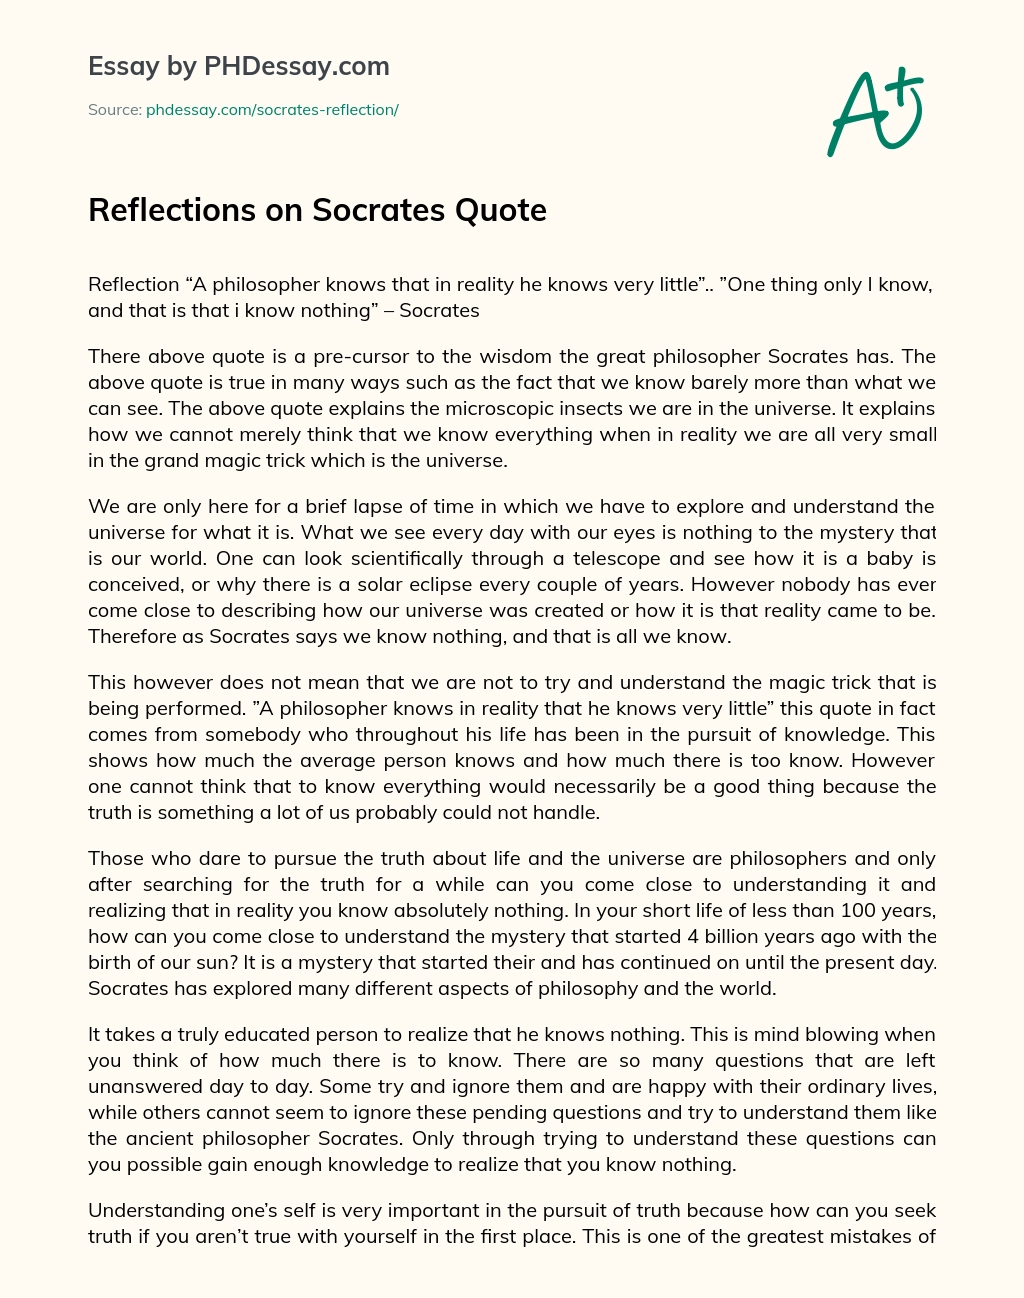 Reflections on Socrates Quote essay